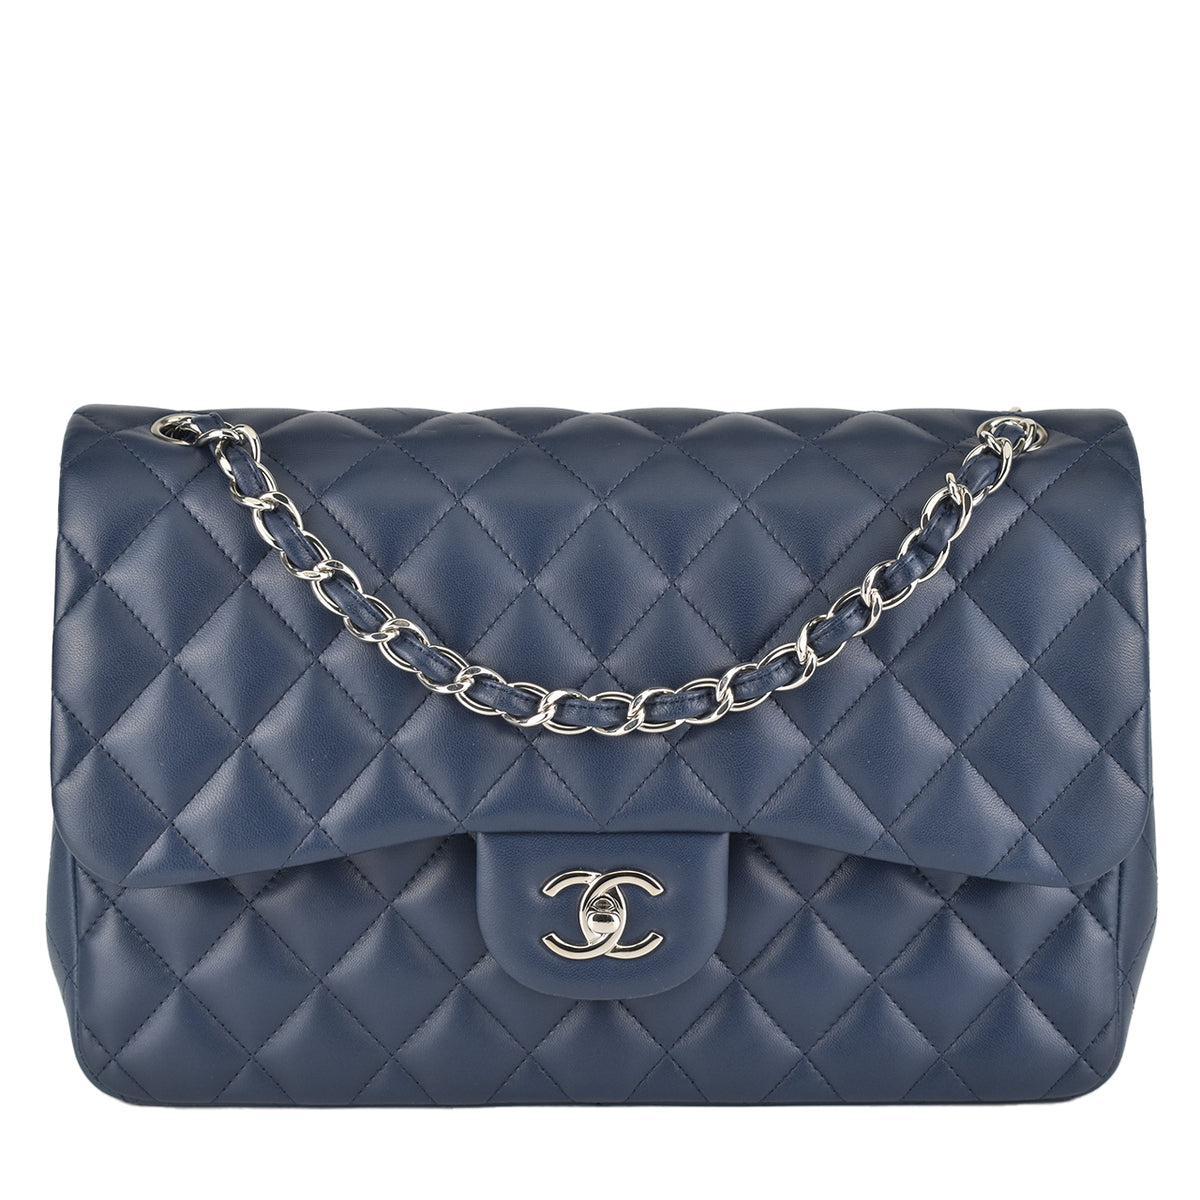 The Best Chanel Purse at Every Price, Handbags and Accessories